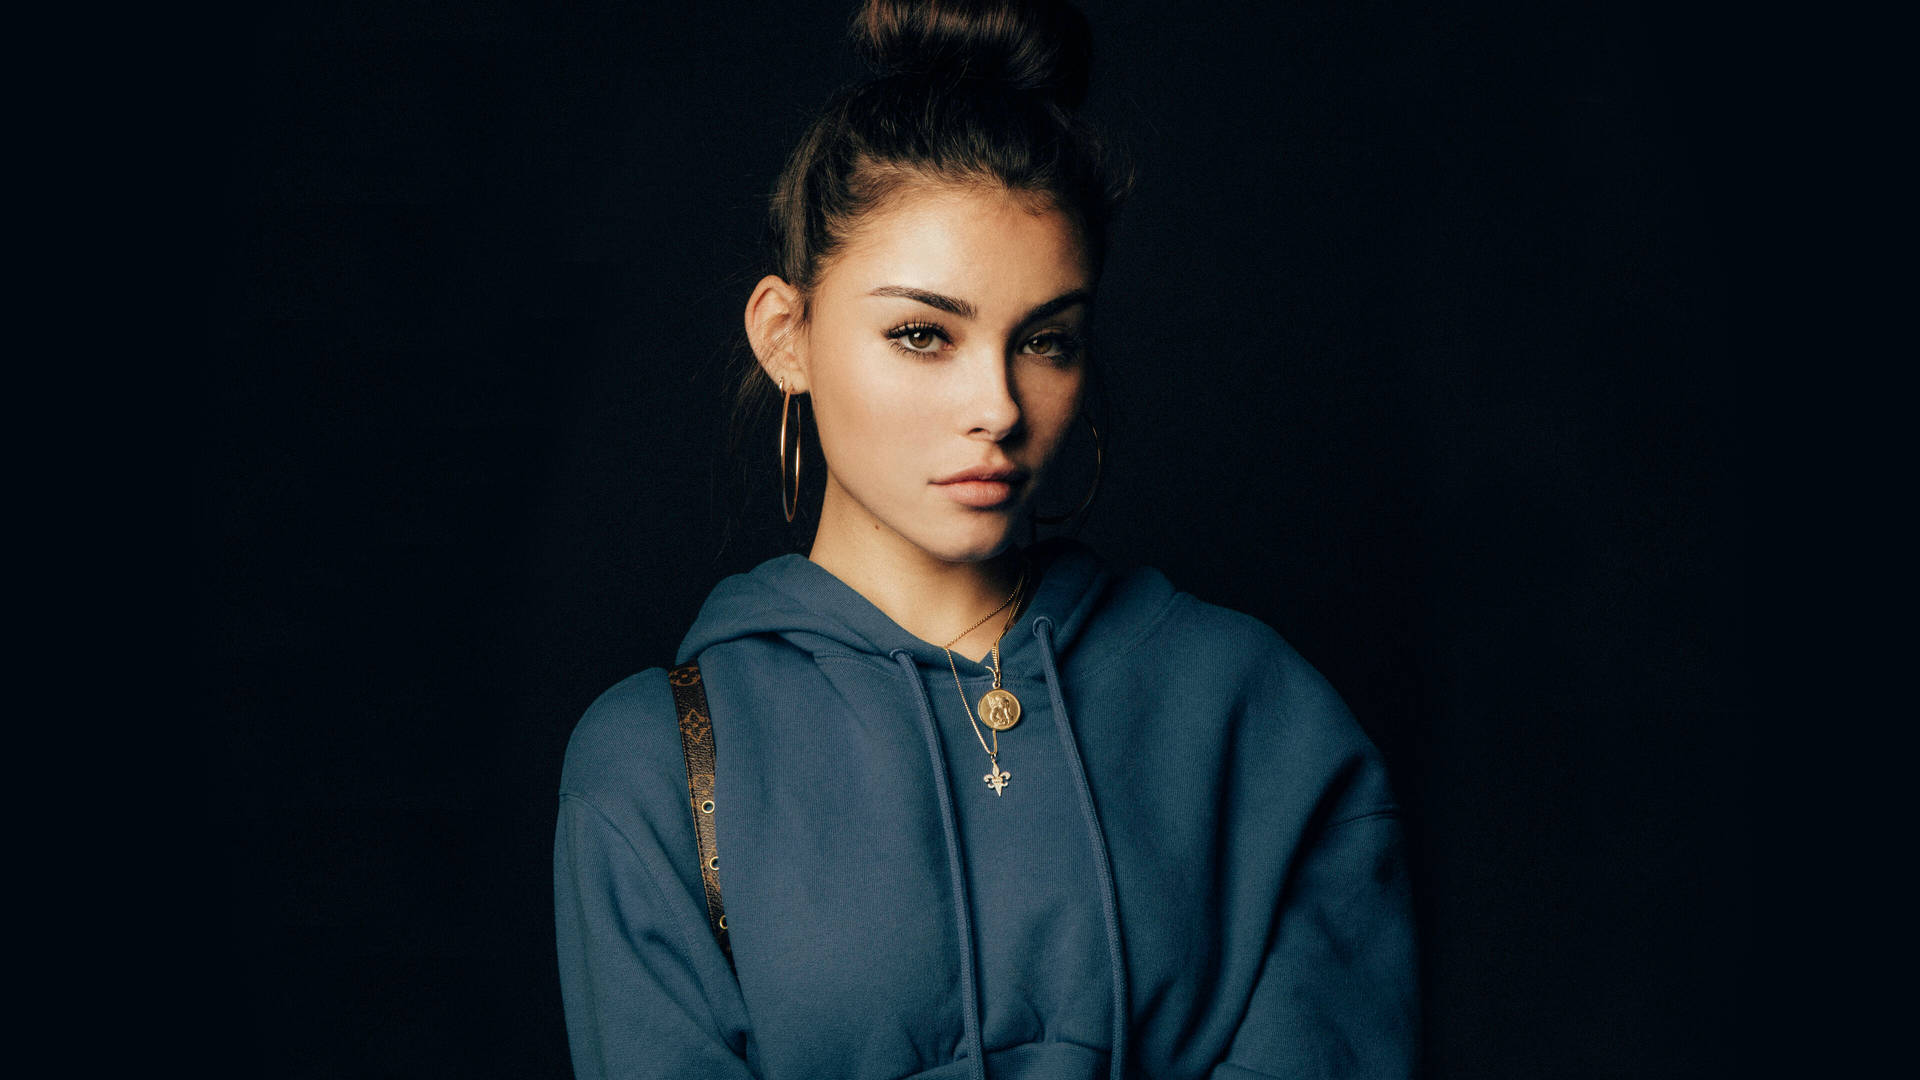 Young Female Artist Madison Beer